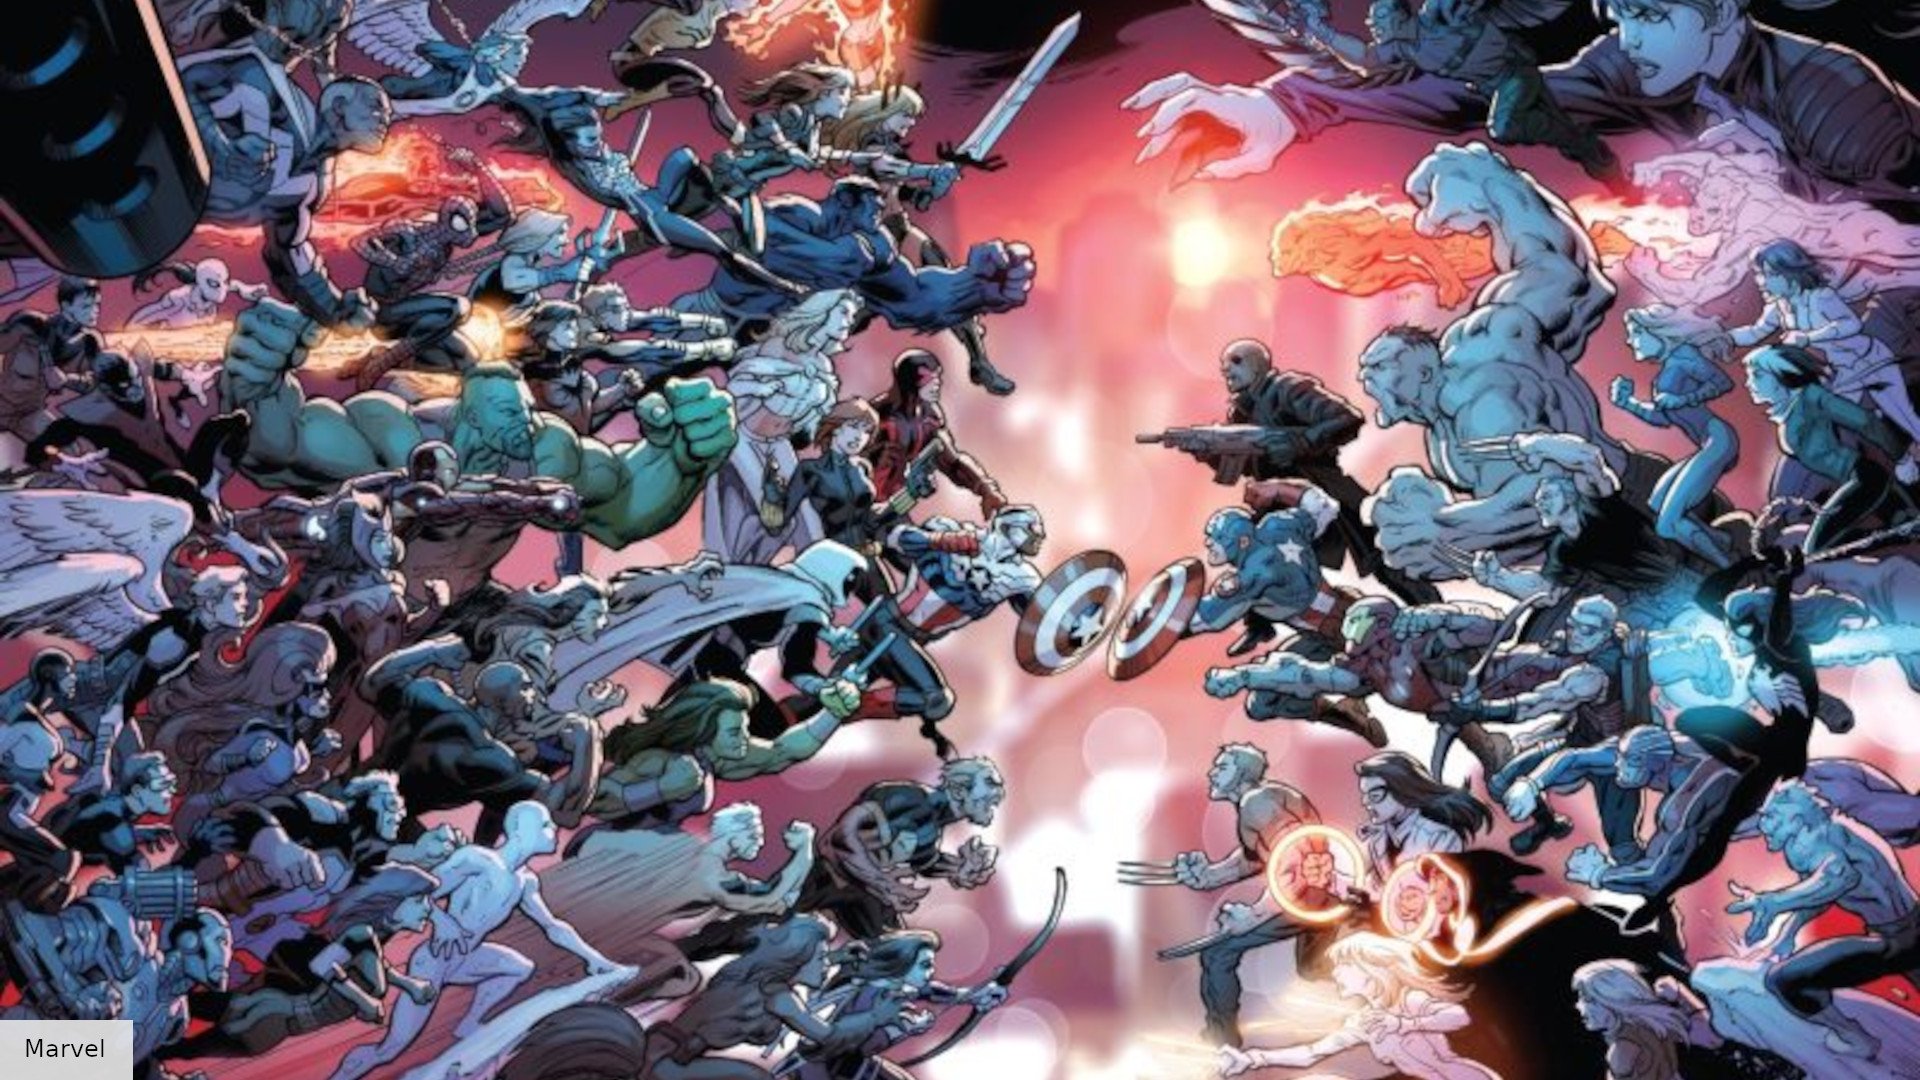 Marvel Reportedly Developing A Live Action Secret Wars Adaptation. The Digital Fix